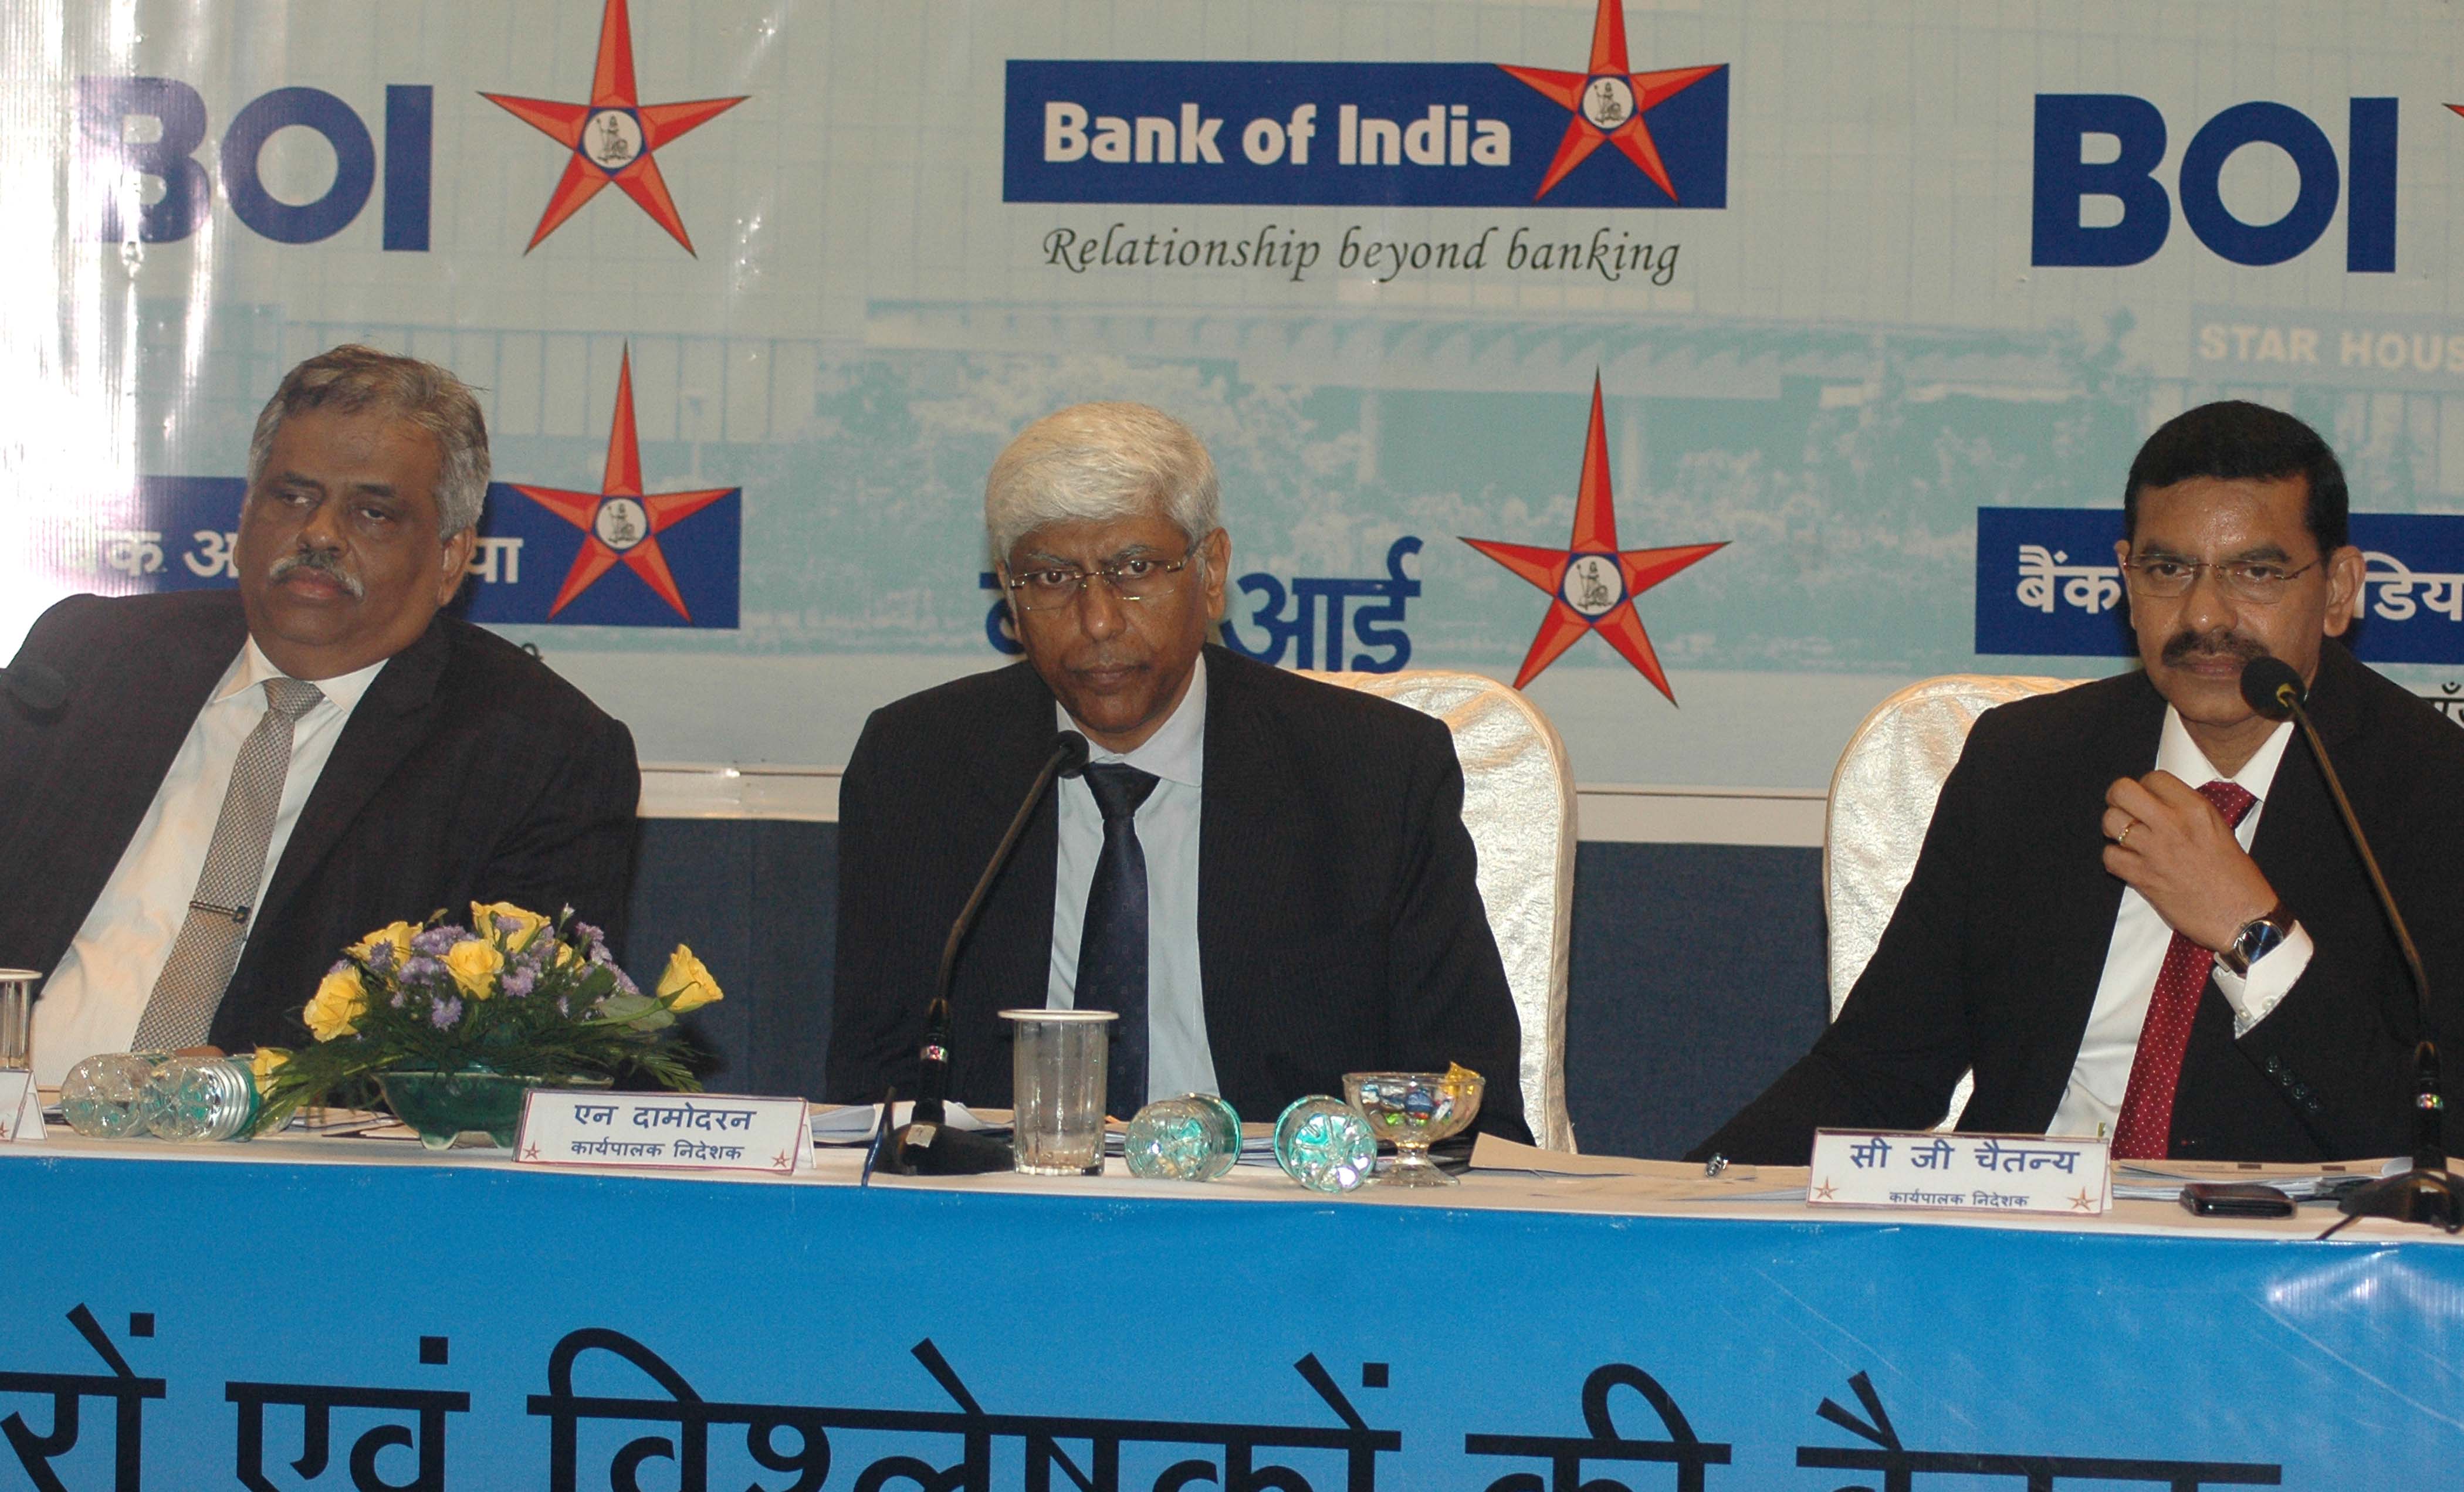 From L-R:  K.V. Raghavendra(General Manager and CFO, Bank of India), A.K. Das ( Executive Director, Bank of India), Shri N. Damodharan (Executive Director, Bank of India), C.G. Chaitanya (Executive Director, Bank of India) at Bank of India's Q1 FY20 Result announcement, in Mumbai-Photo By Sachin Murdeshwar /GPN 